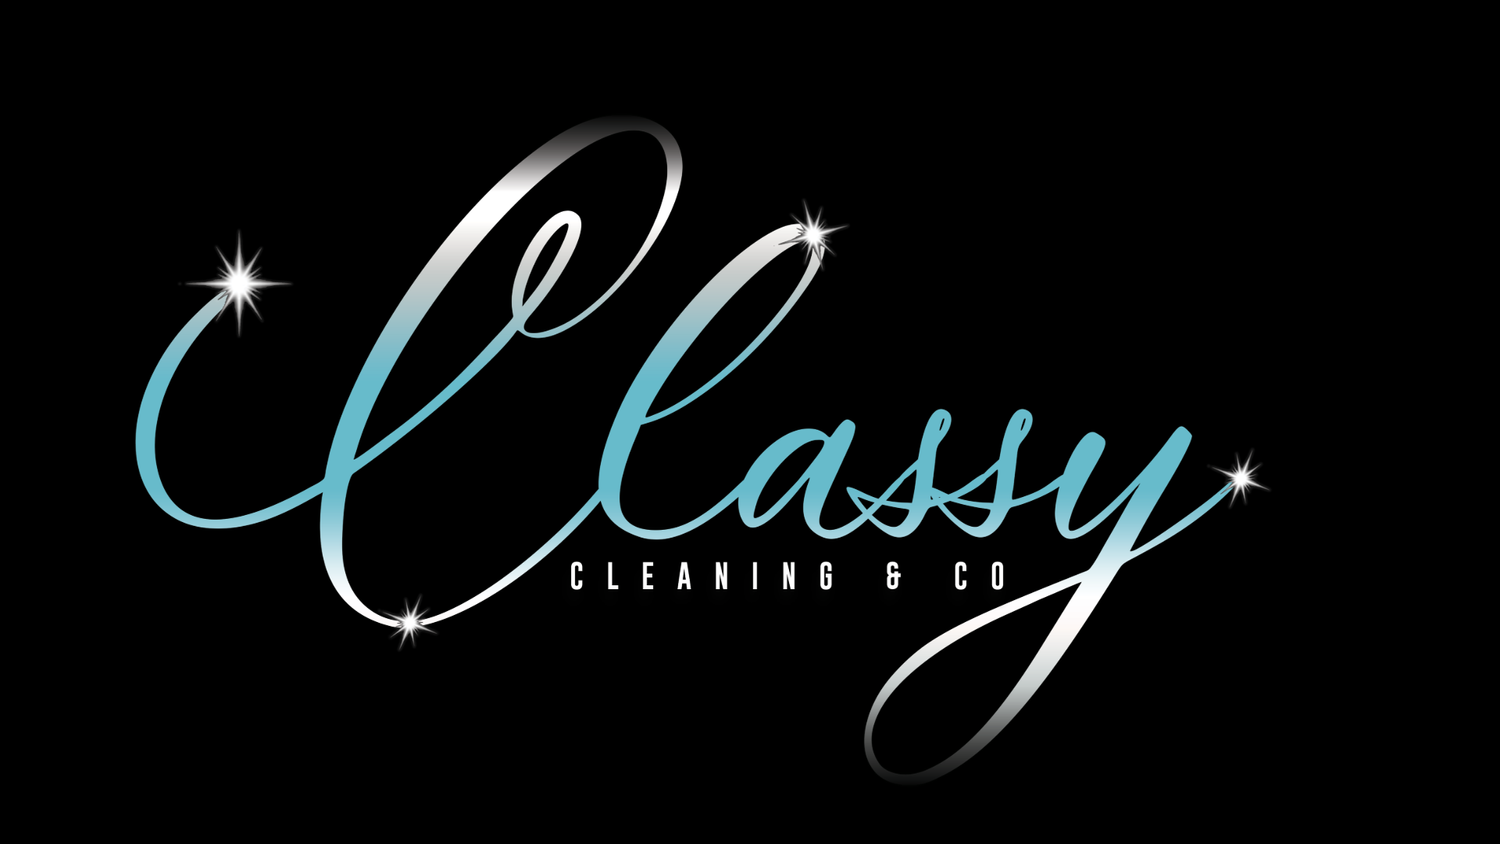 CLASSY CLEANING &amp; CO